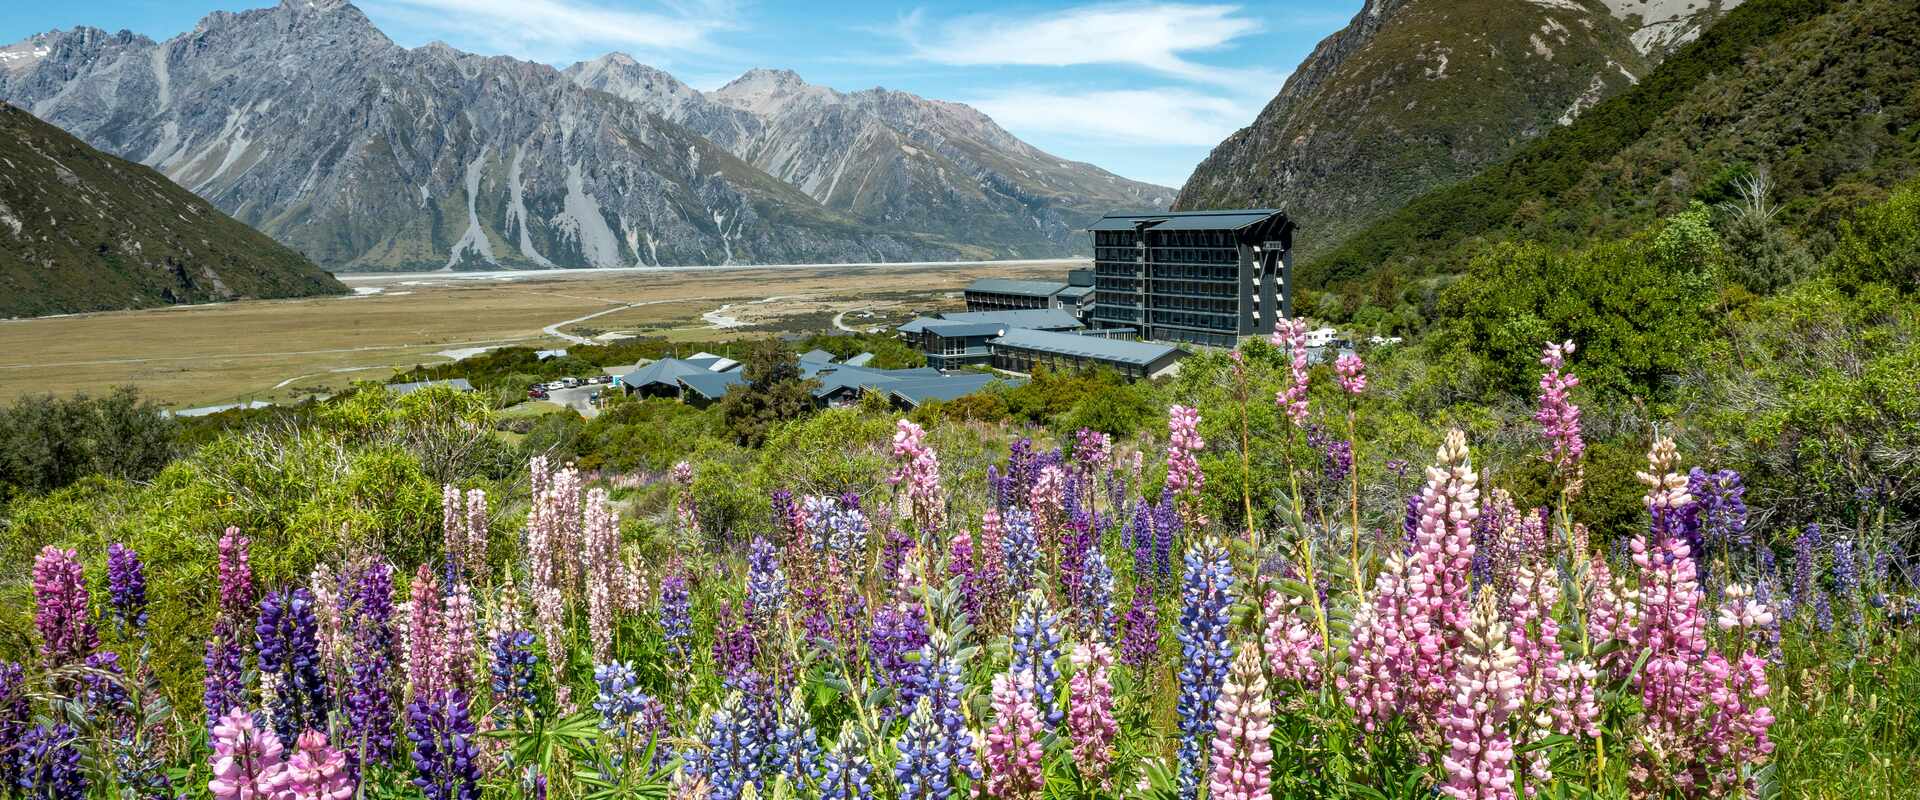 Hermitage Hotel surrounded by mountains and lupins